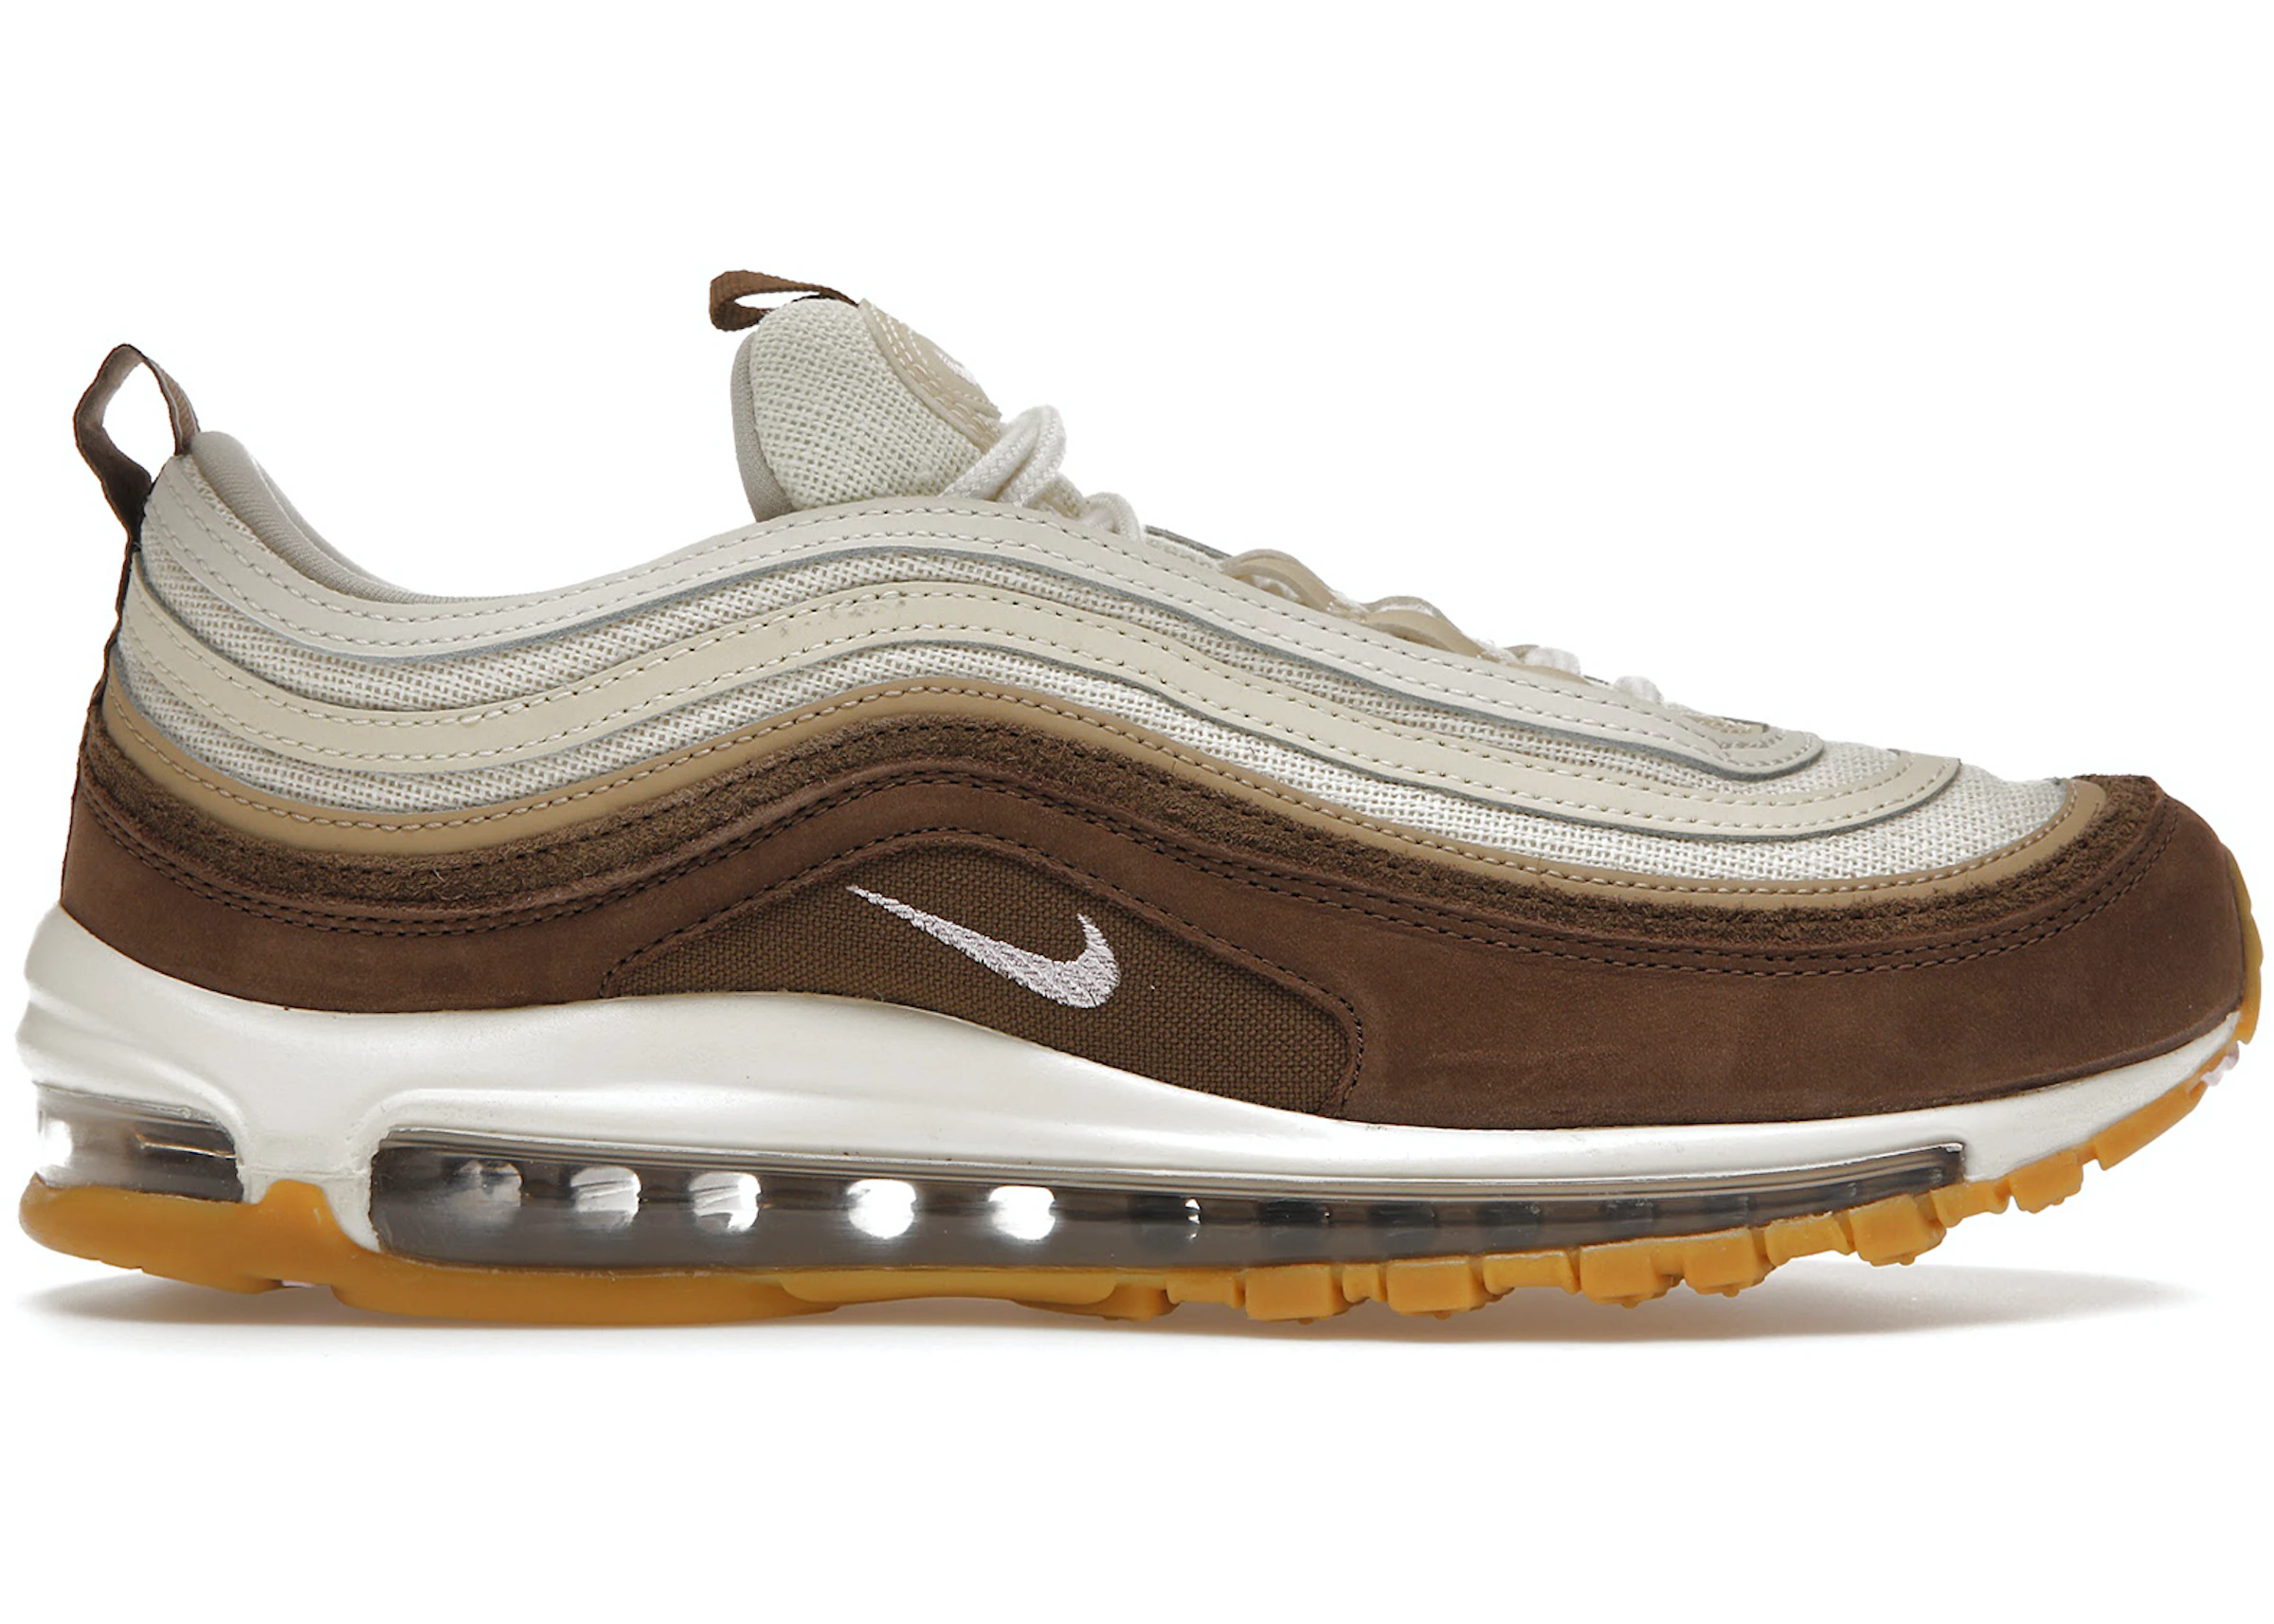 Communication network Emphasis Be excited Nike Air Max 97 Sneakers - StockX